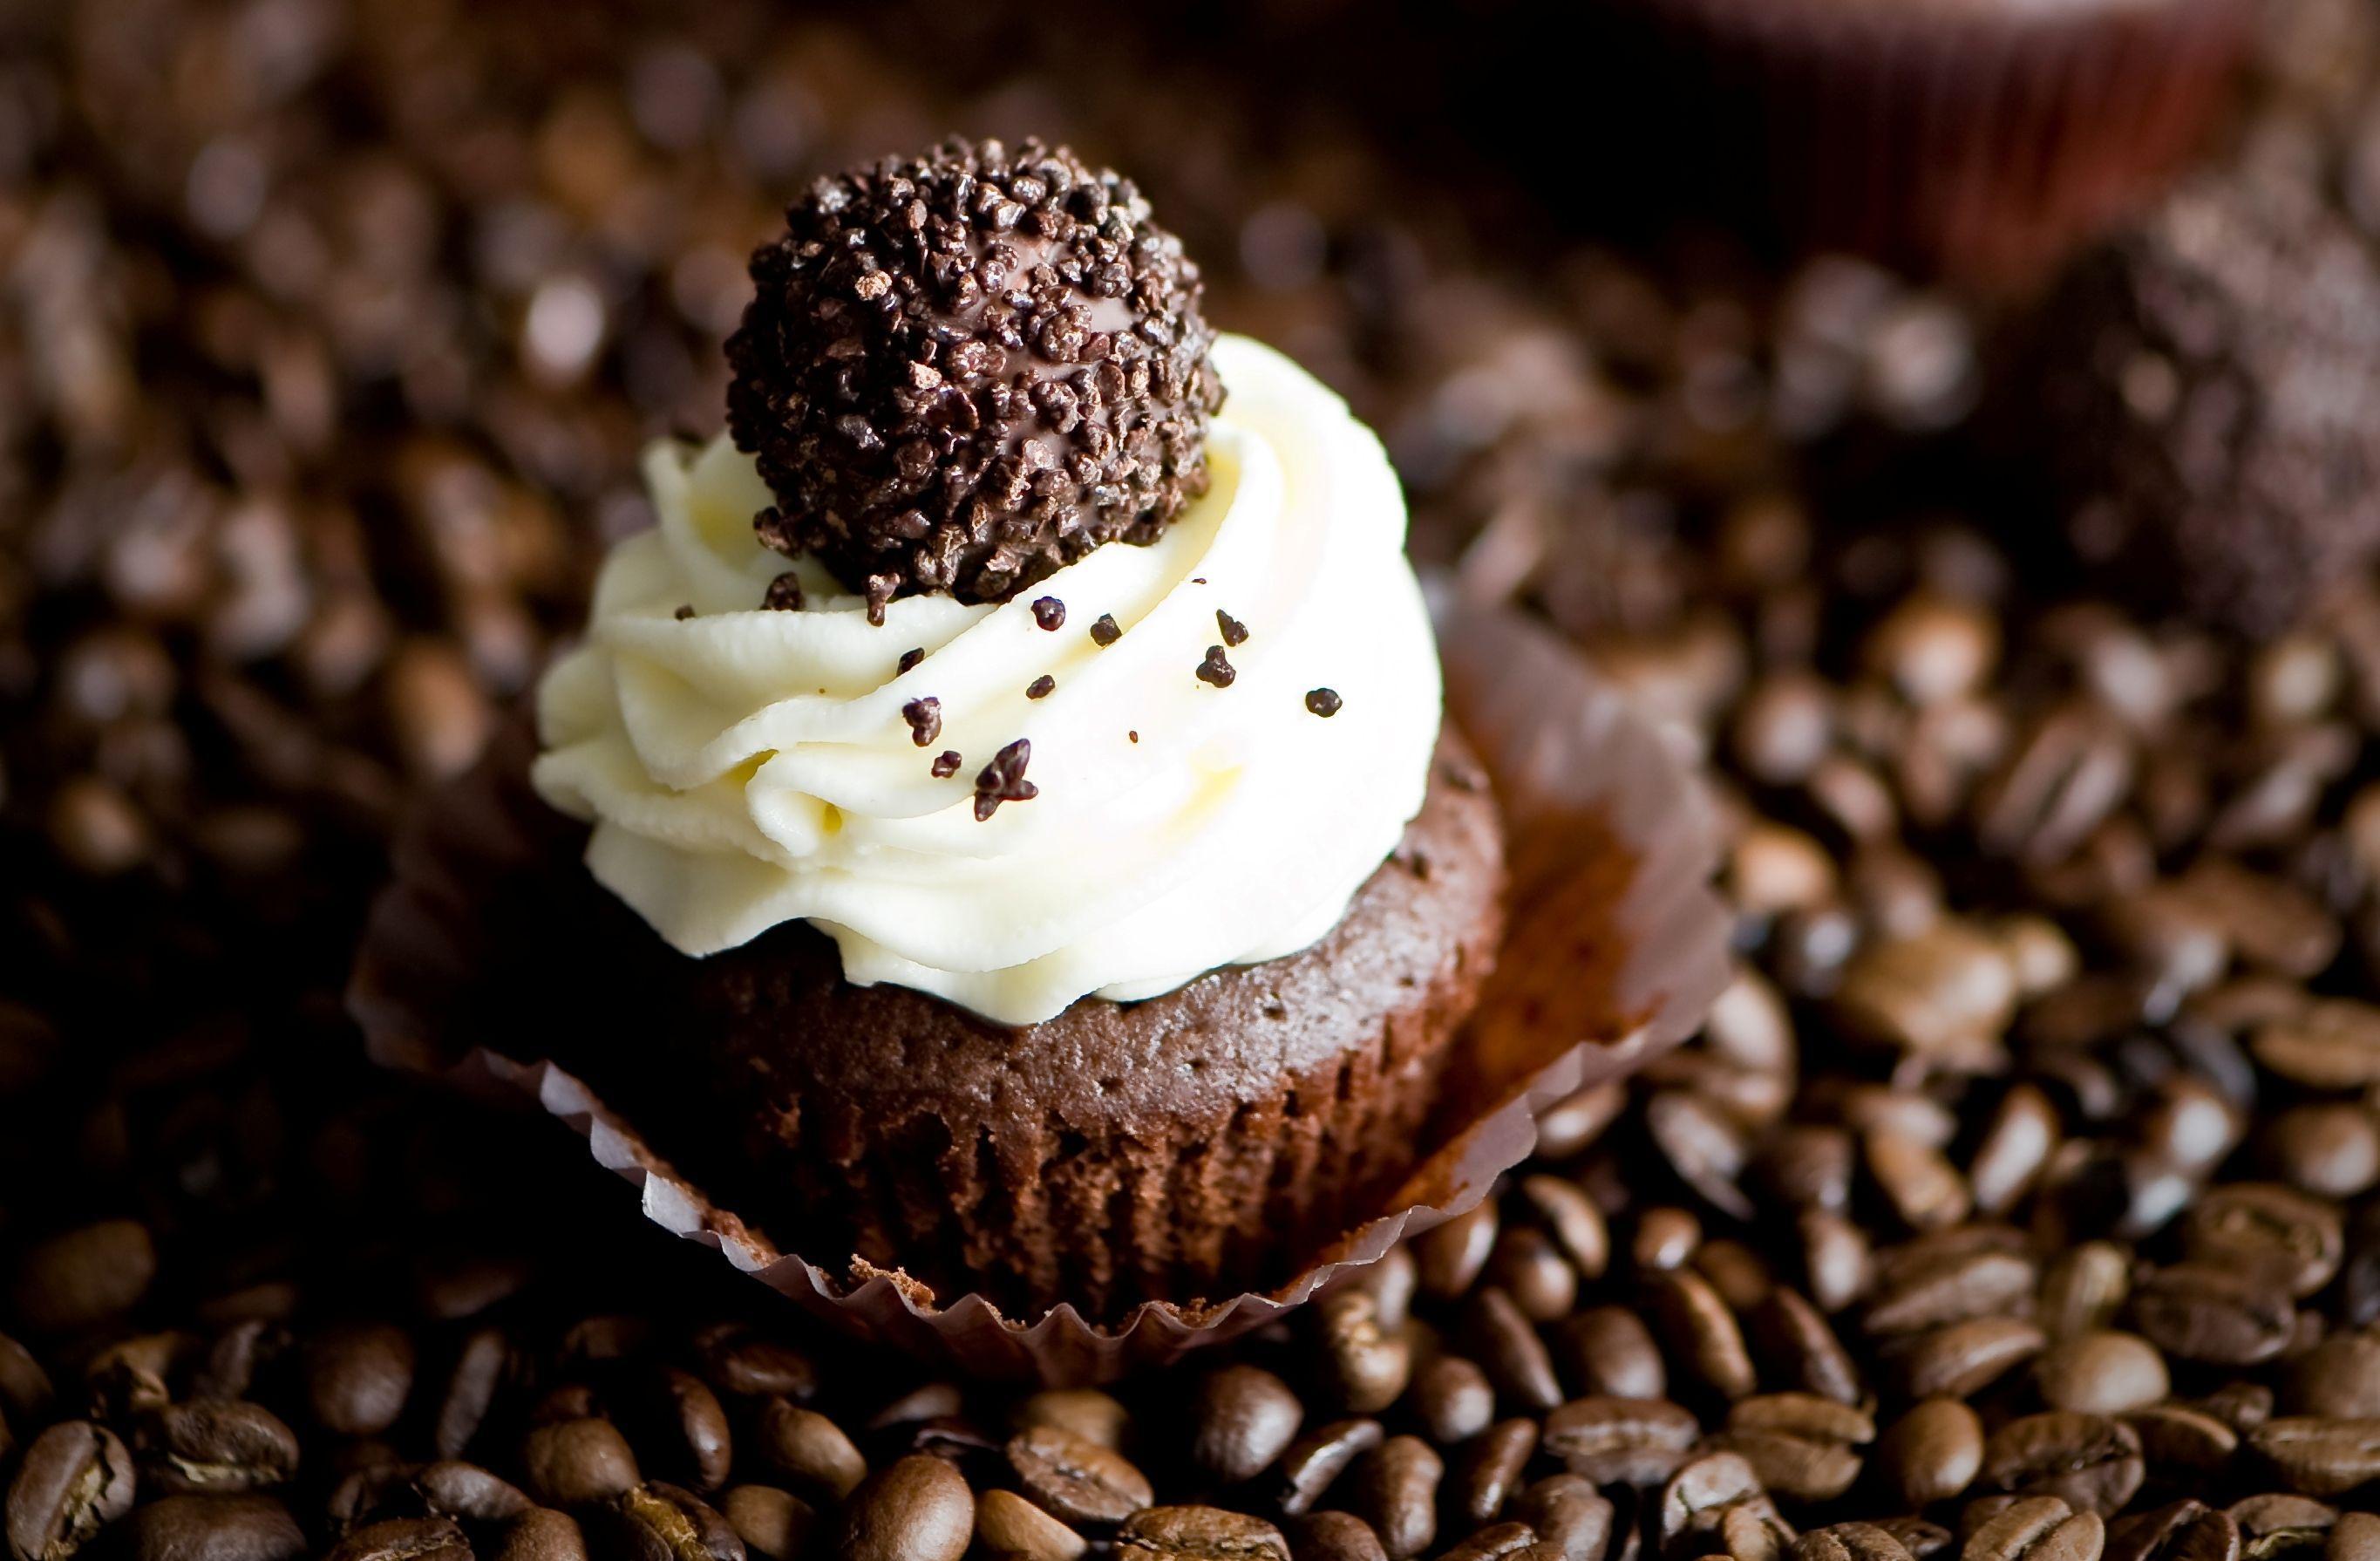 Tasty Chocolate Cupcake With Vanilla Buttercream Frosting